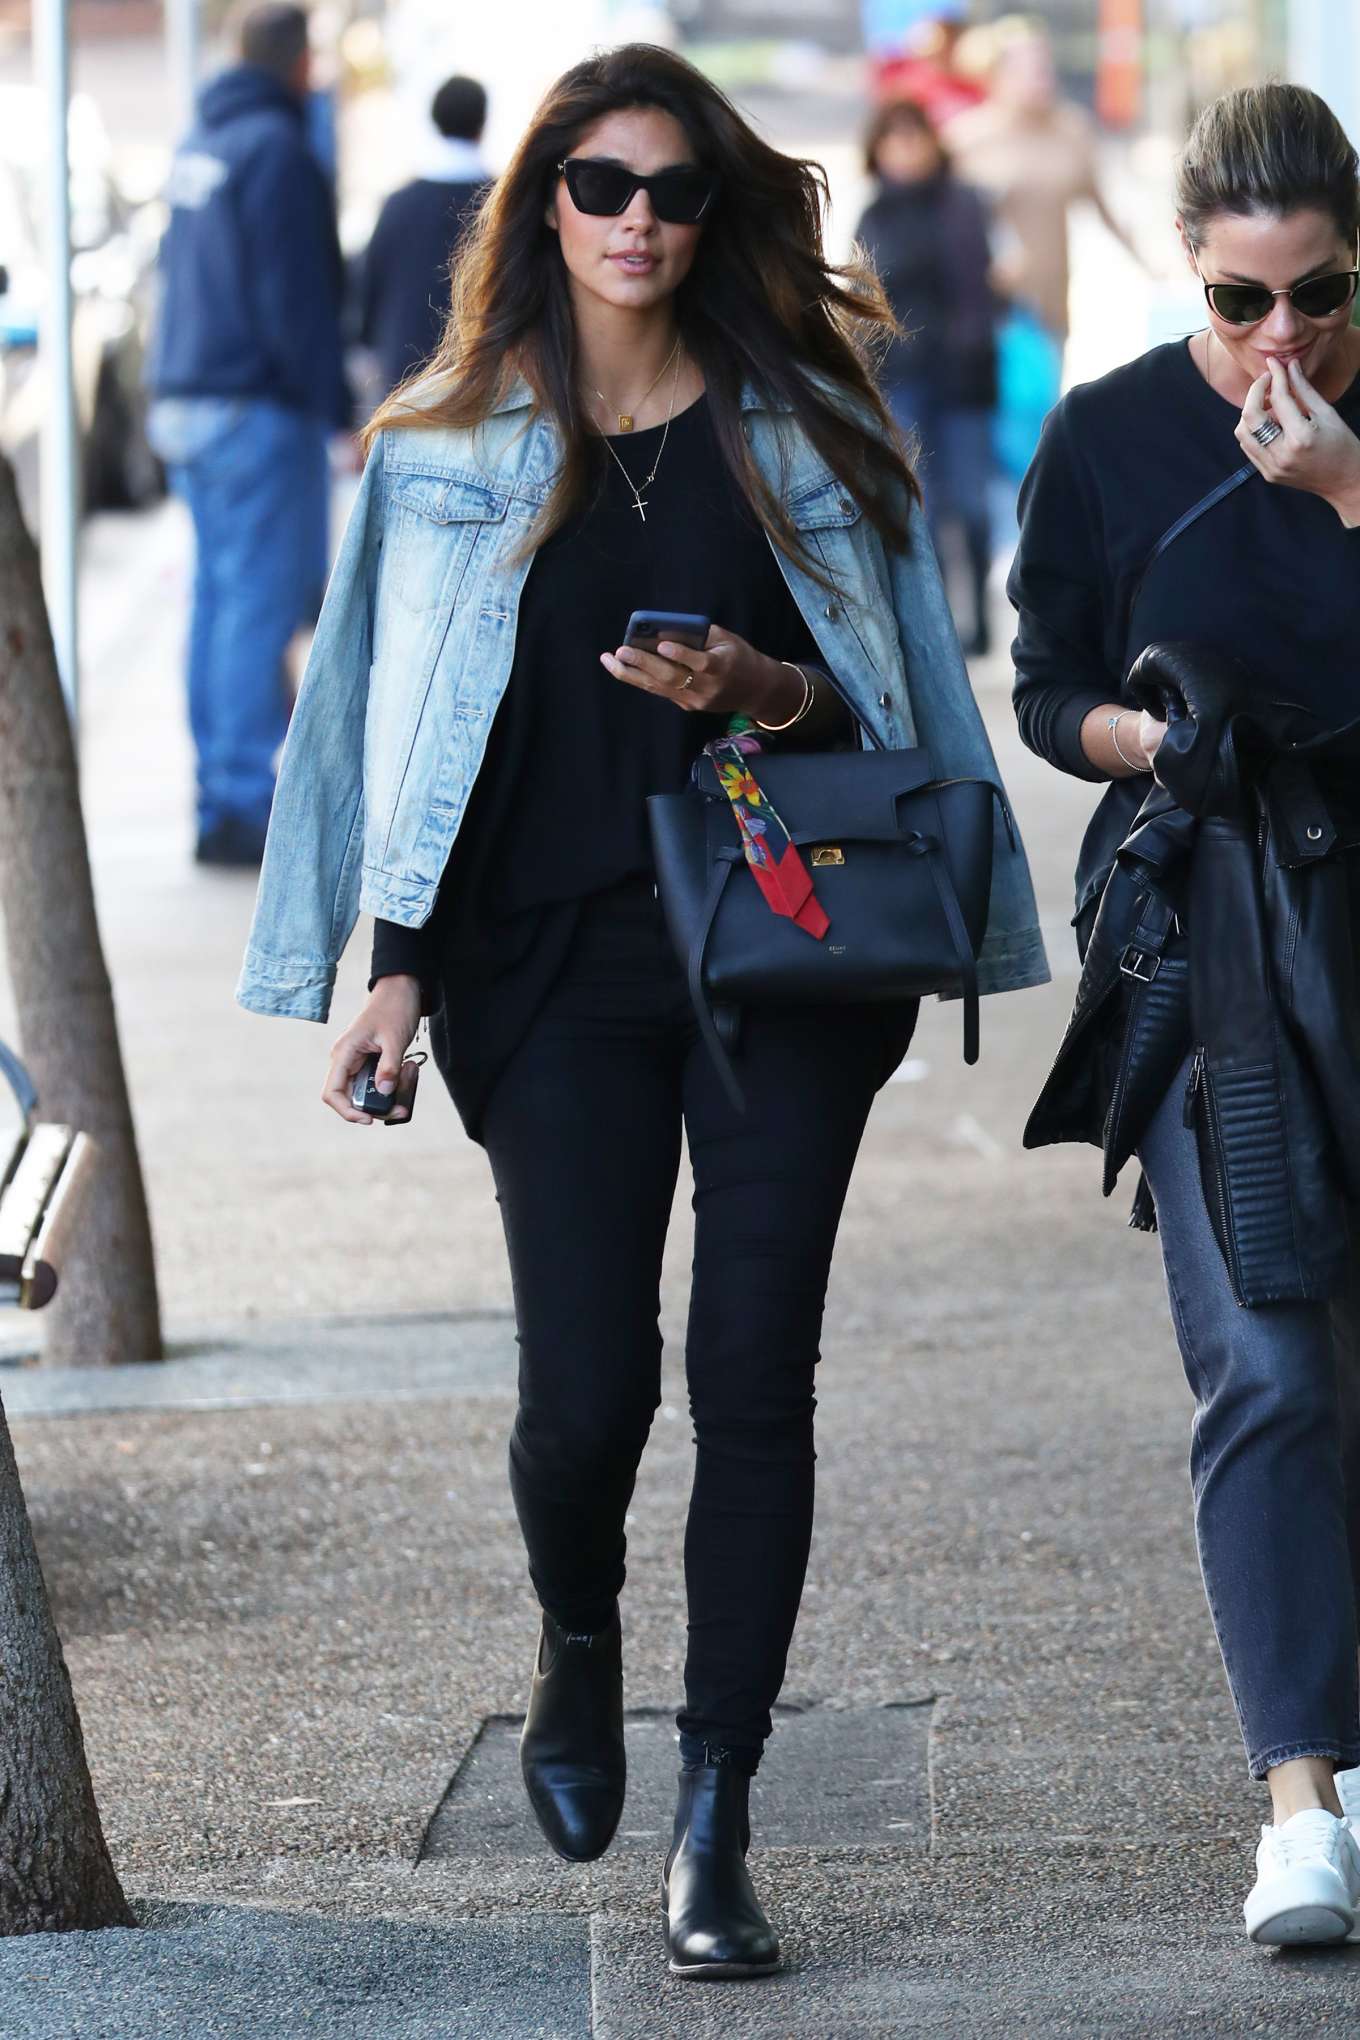 Pia Miller with girlfriend heading out for lunch in Bondi-07 | GotCeleb